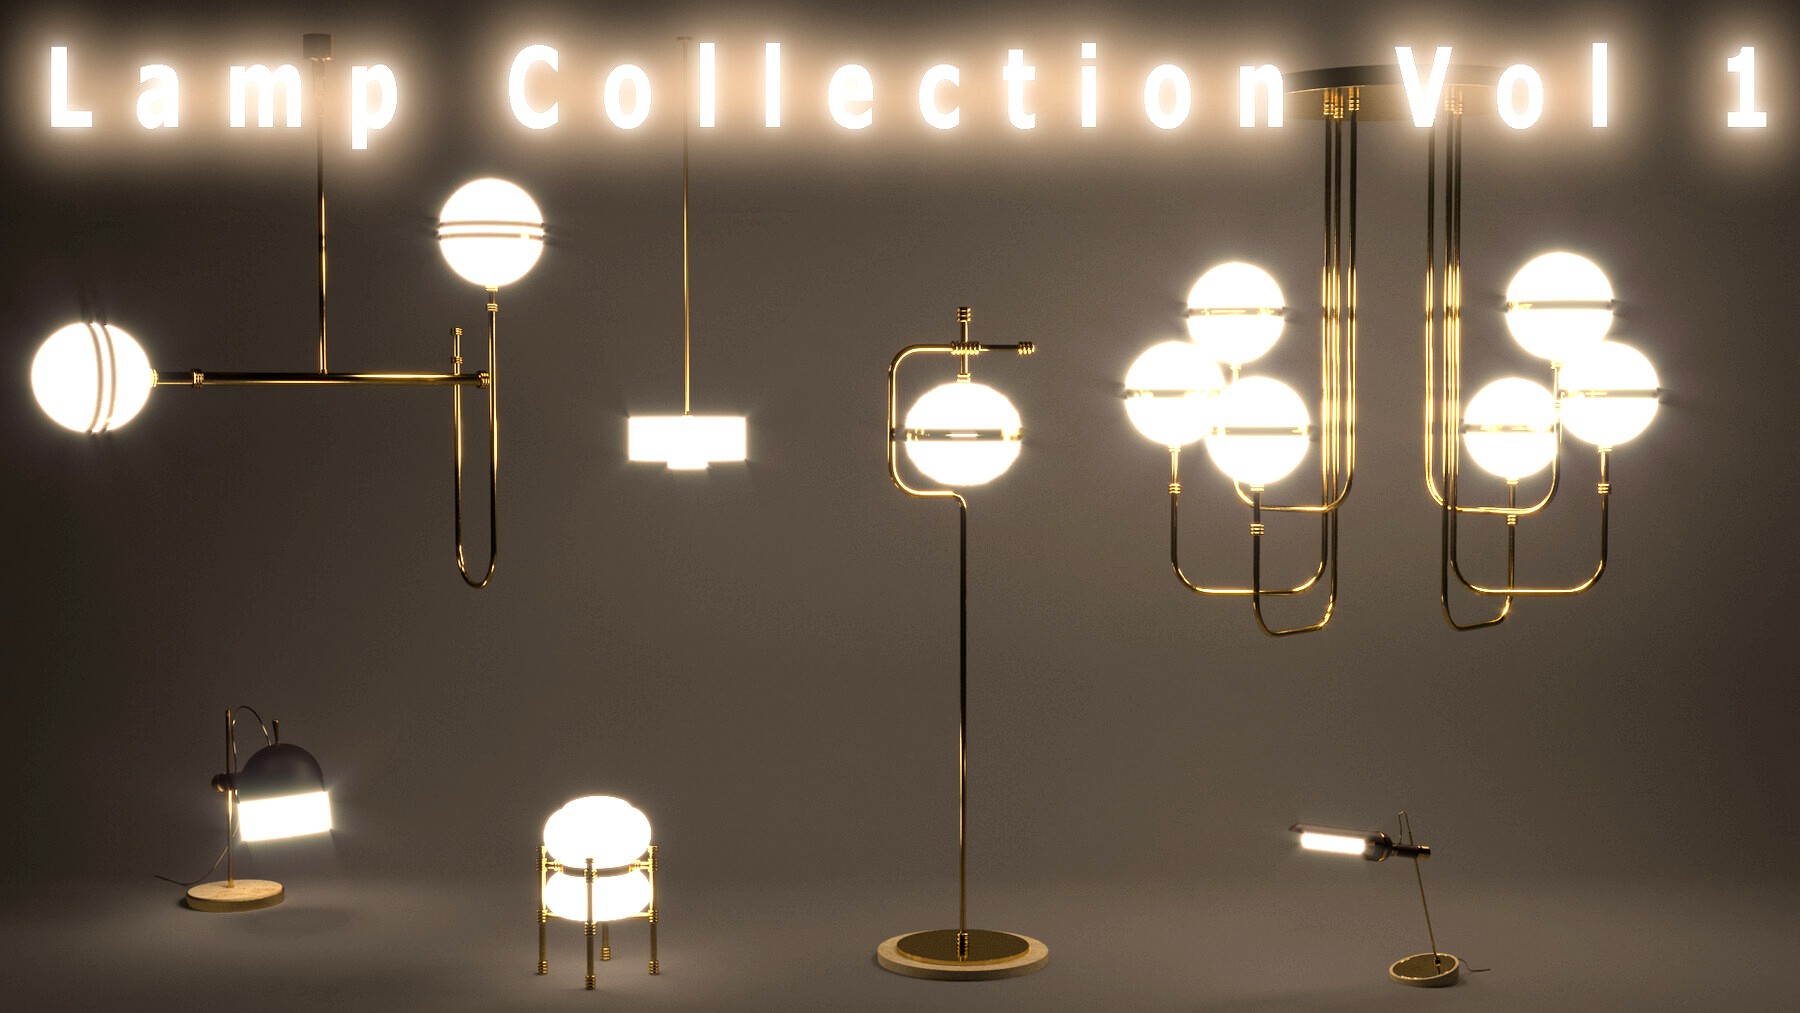 Lamp Collection Vol 01